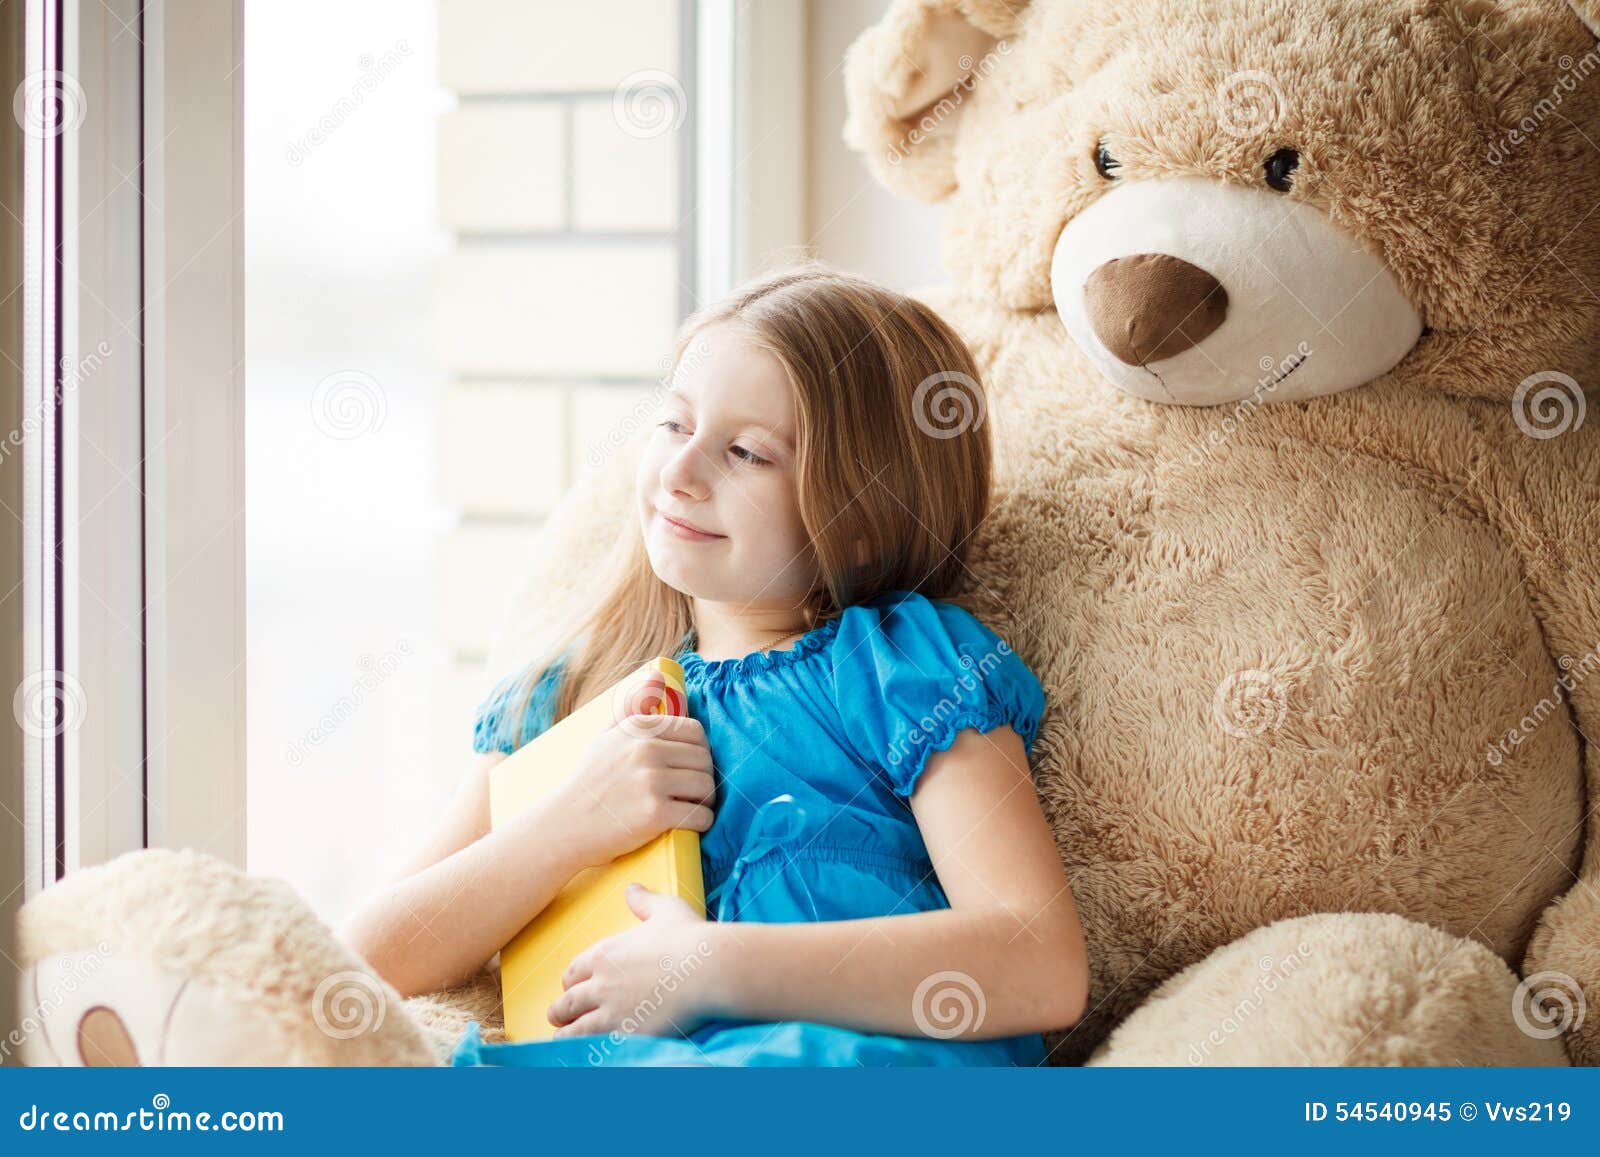 Little Girl Reading on Windowsill with Big Toy Stock Image - Image of ...